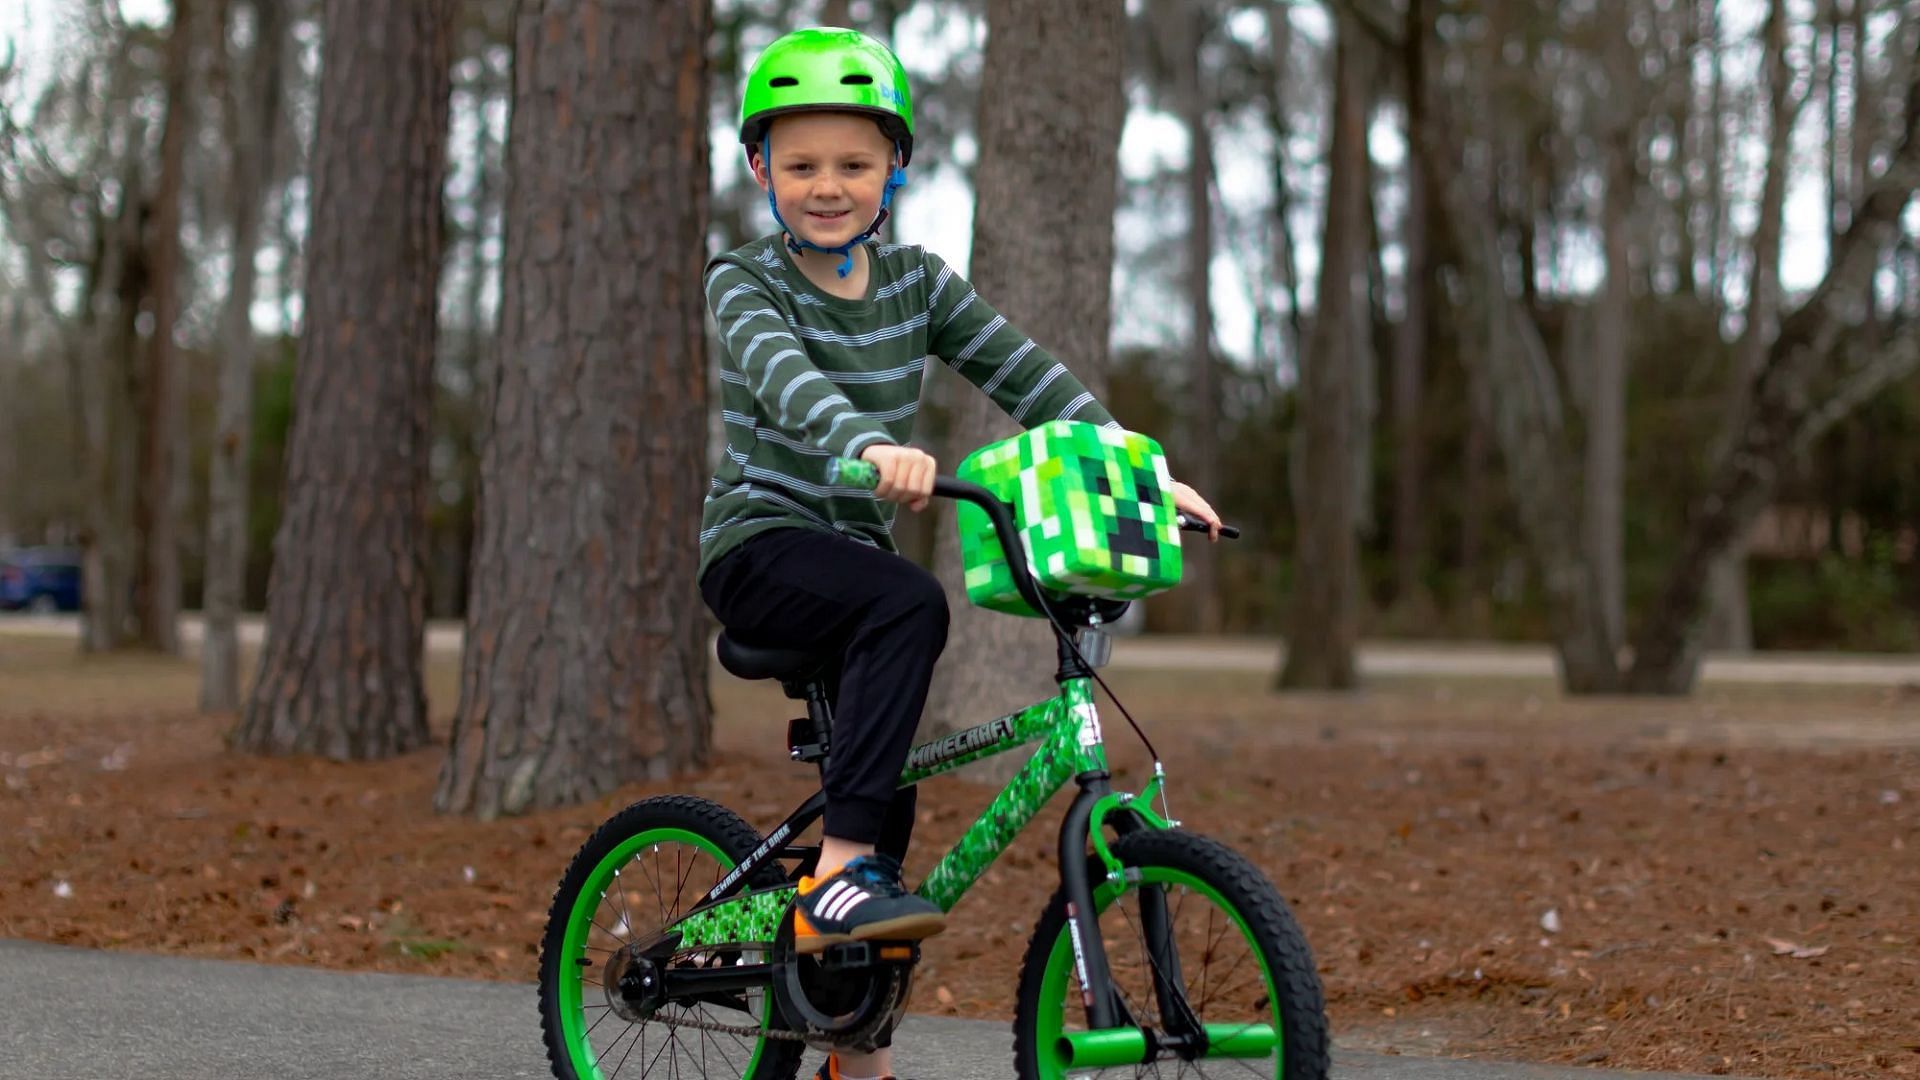 Dynacraft&#039;s creeper-themed bicycle is advised for children ages 6-9 years (Image via Mojang/Dynacraft)